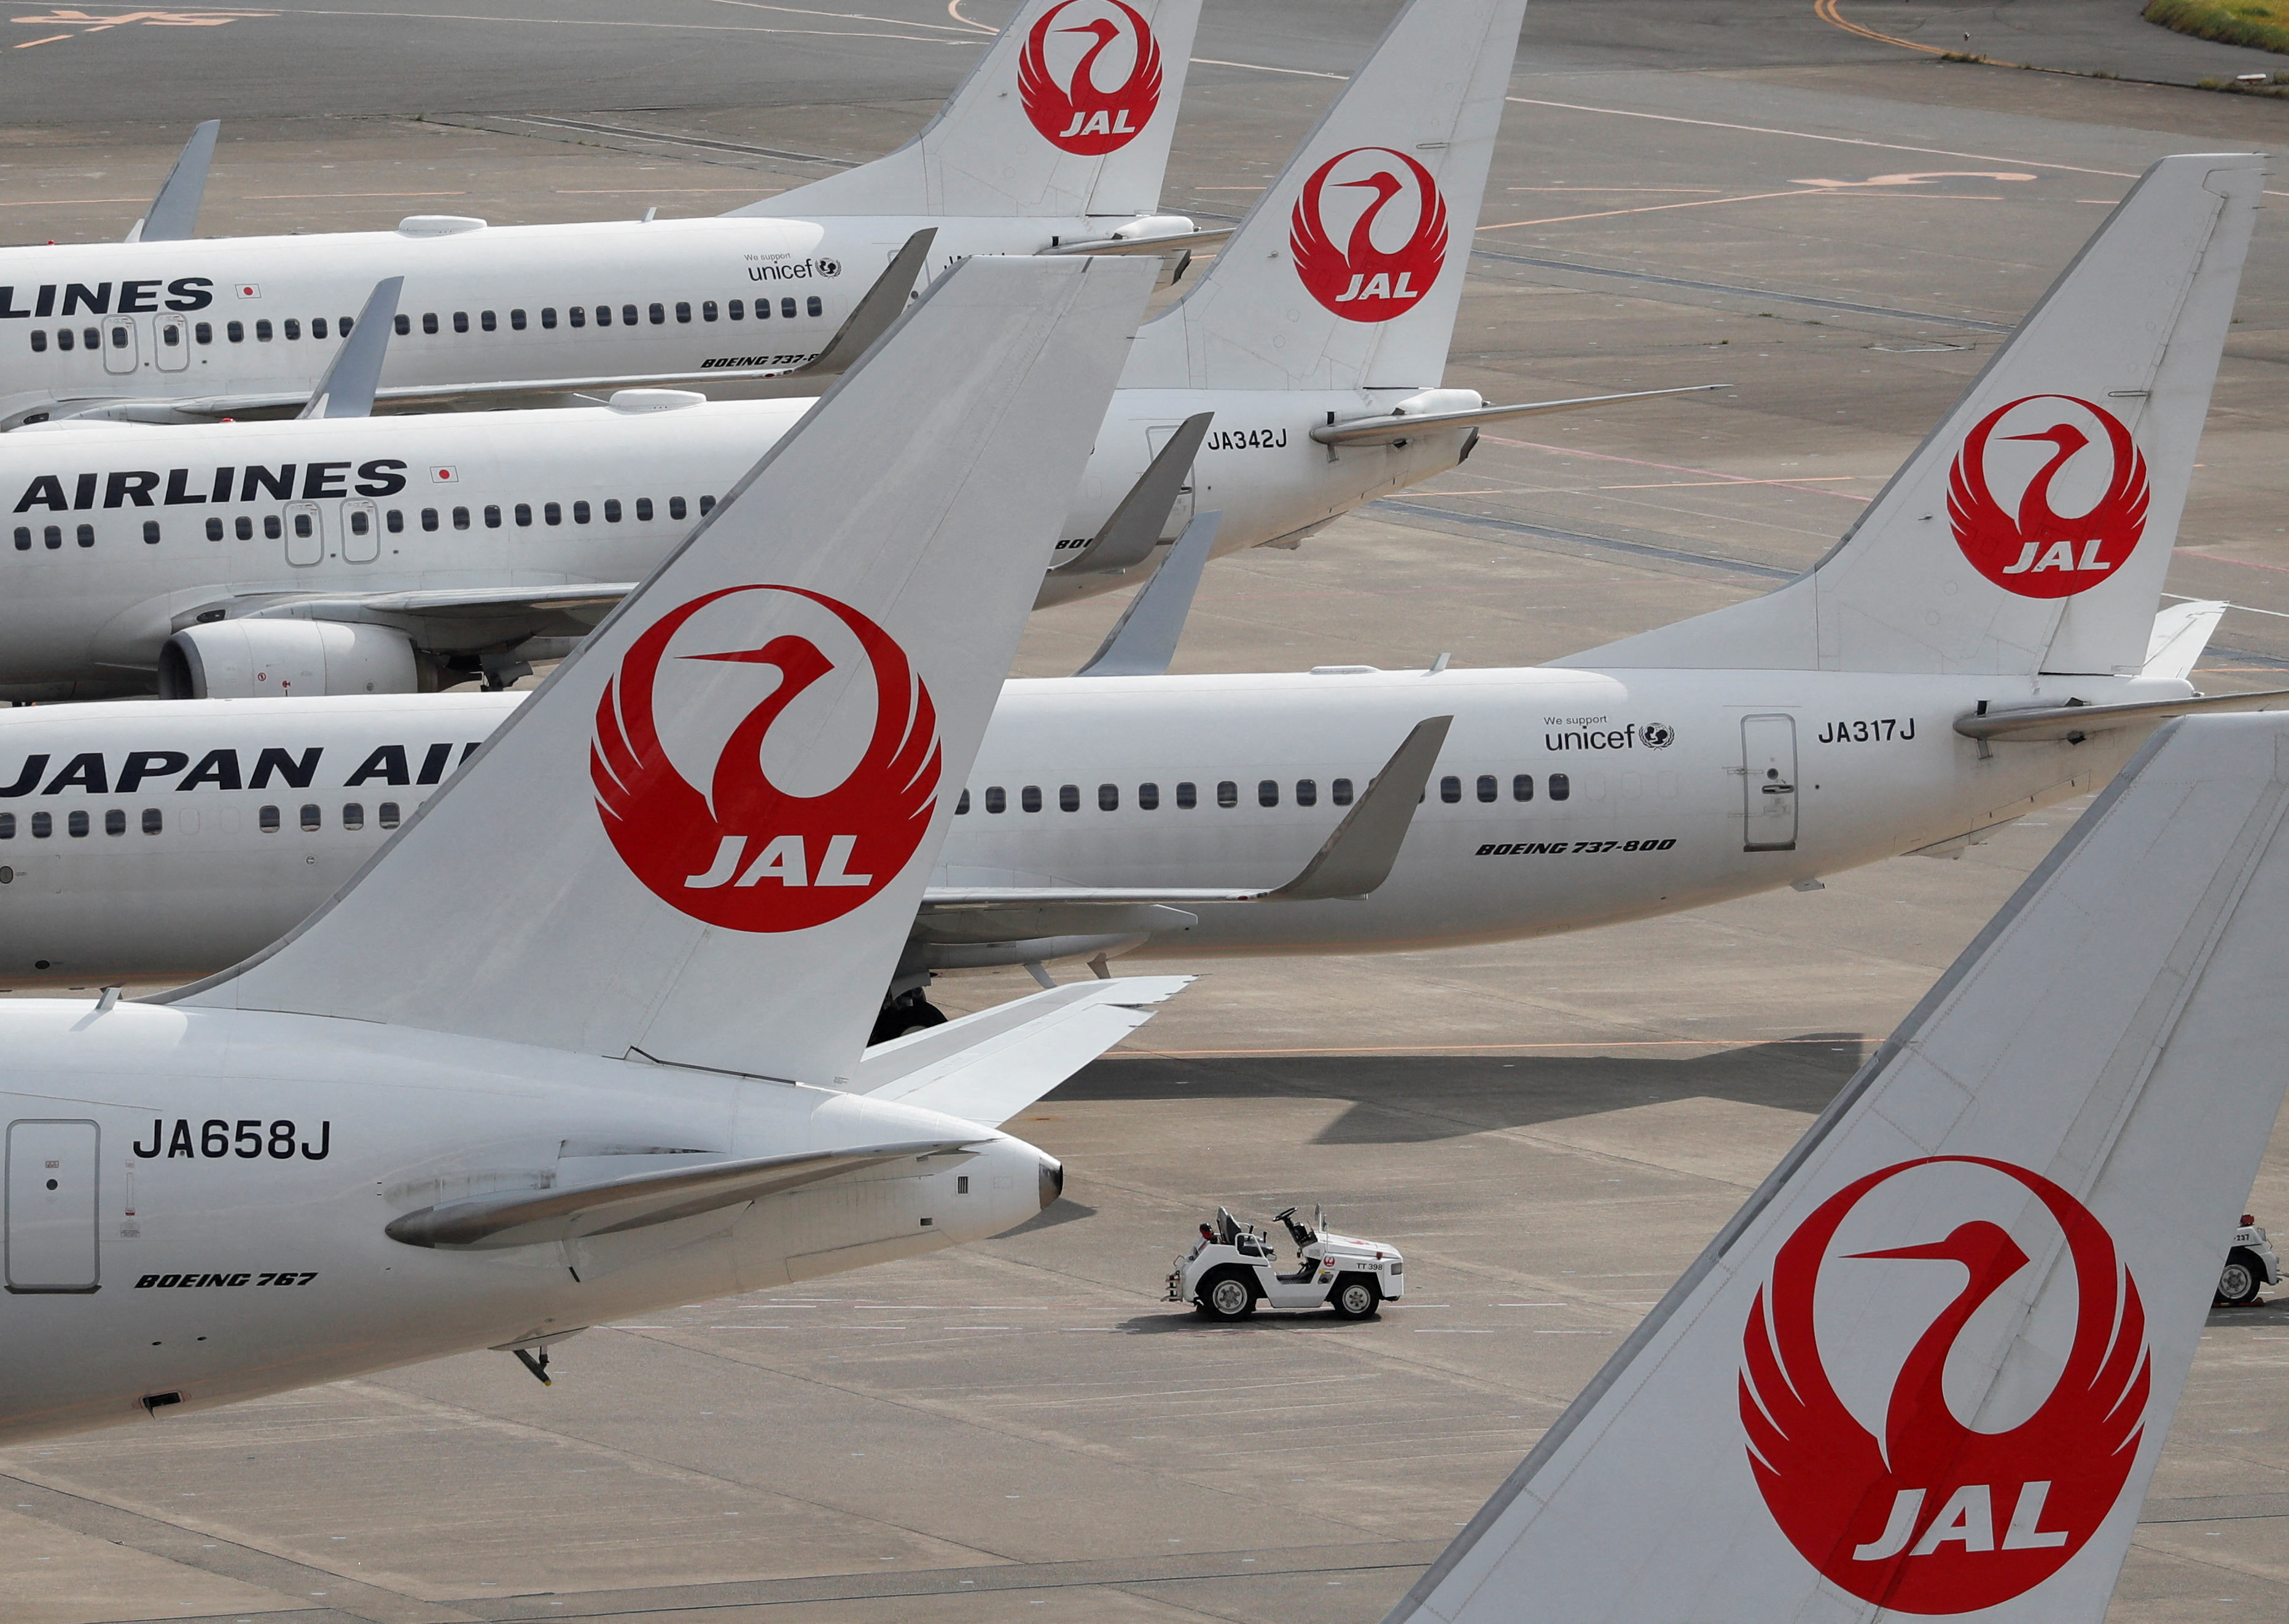 Japan Airlines' (JAL) airplanes are seen, amid the coronavirus disease (COVID-19) outbreak, at Haneda Airport in Tokyo